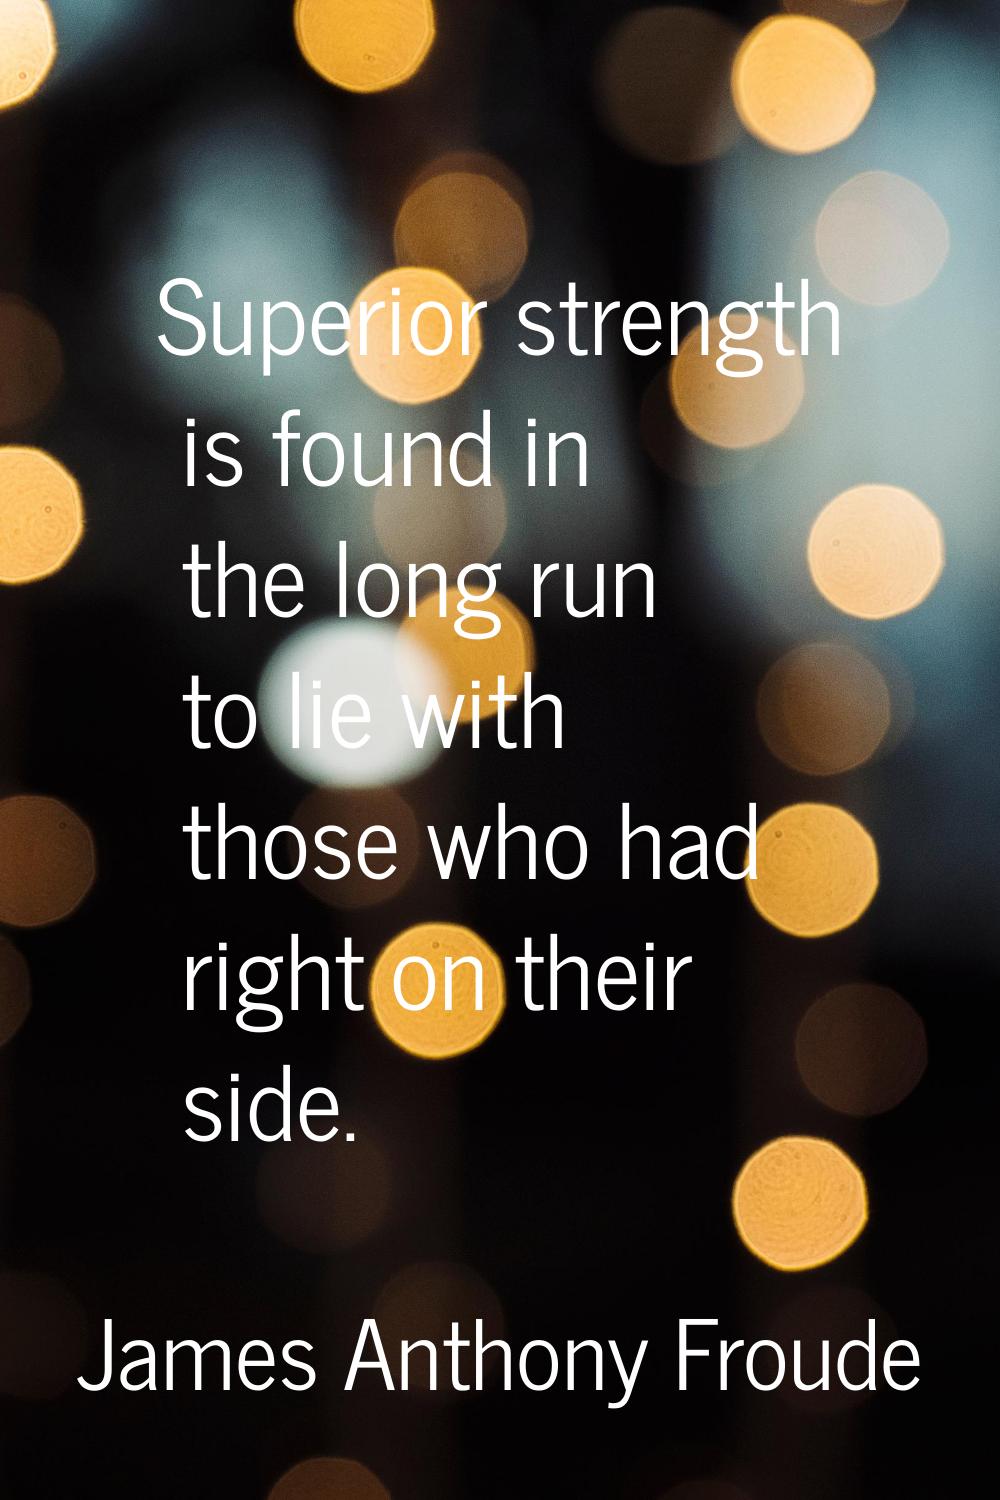 Superior strength is found in the long run to lie with those who had right on their side.